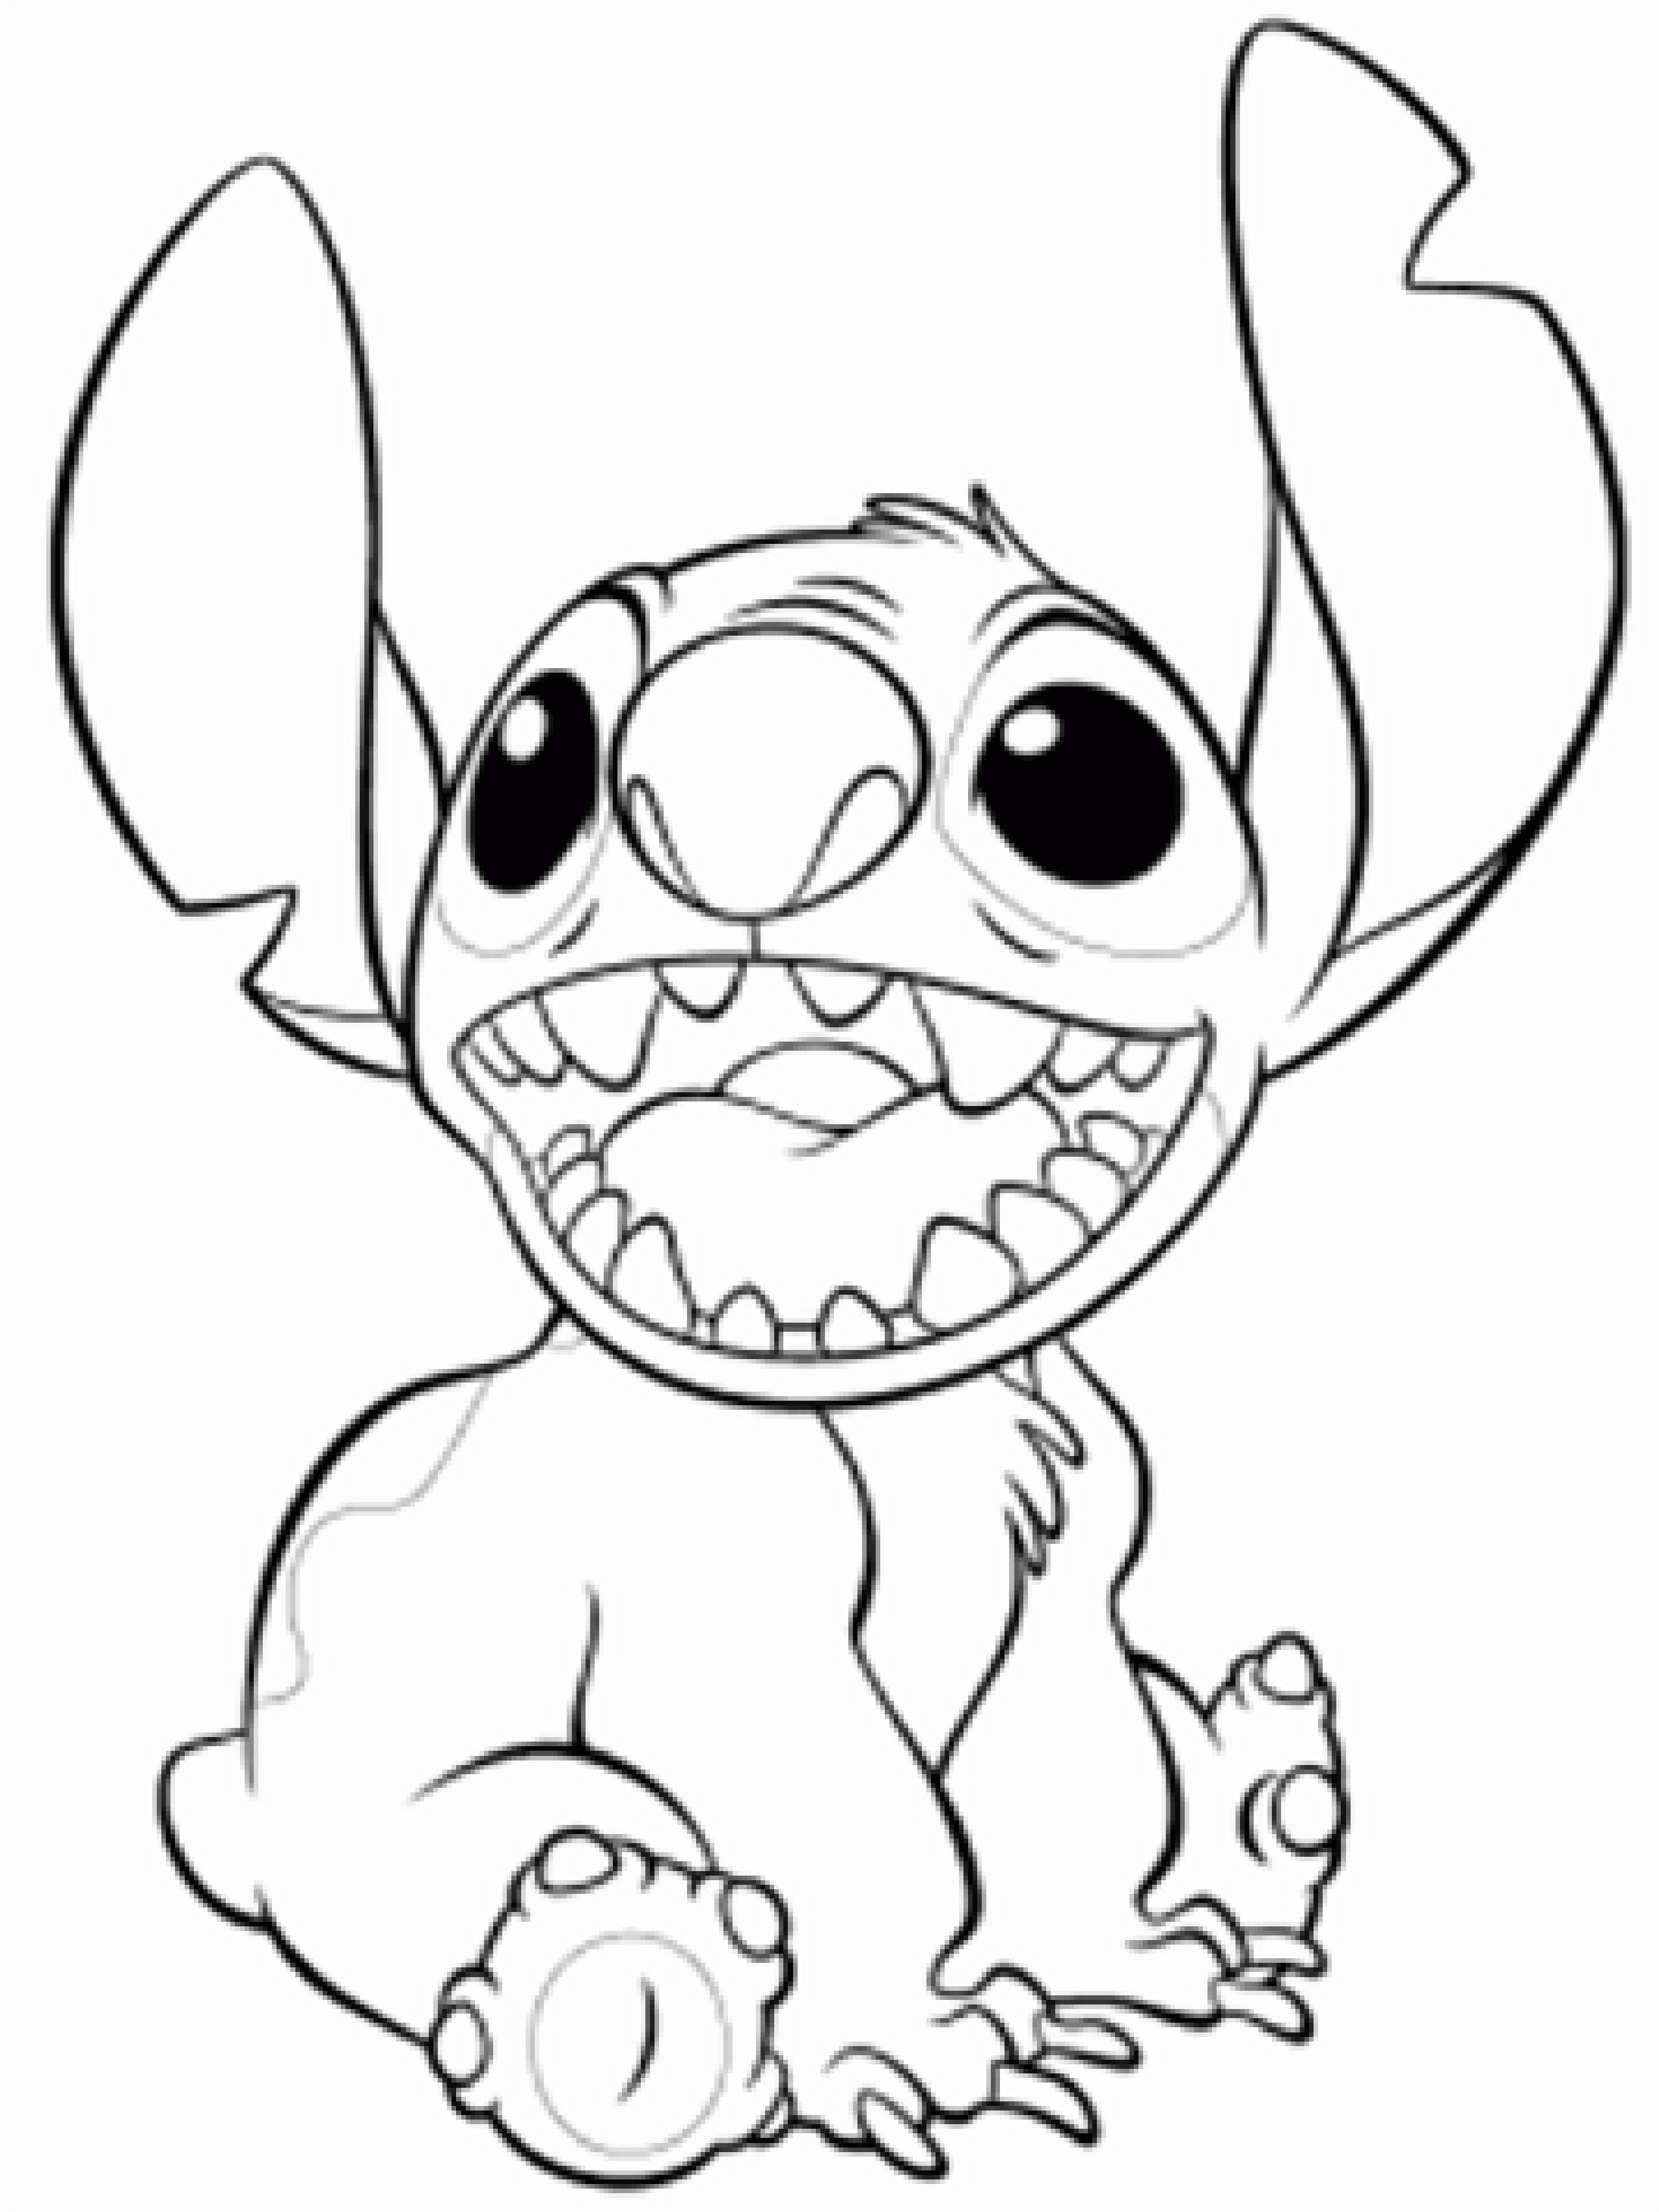 Preschoolers Cute Disney Coloring Pages To Download And Print For ...